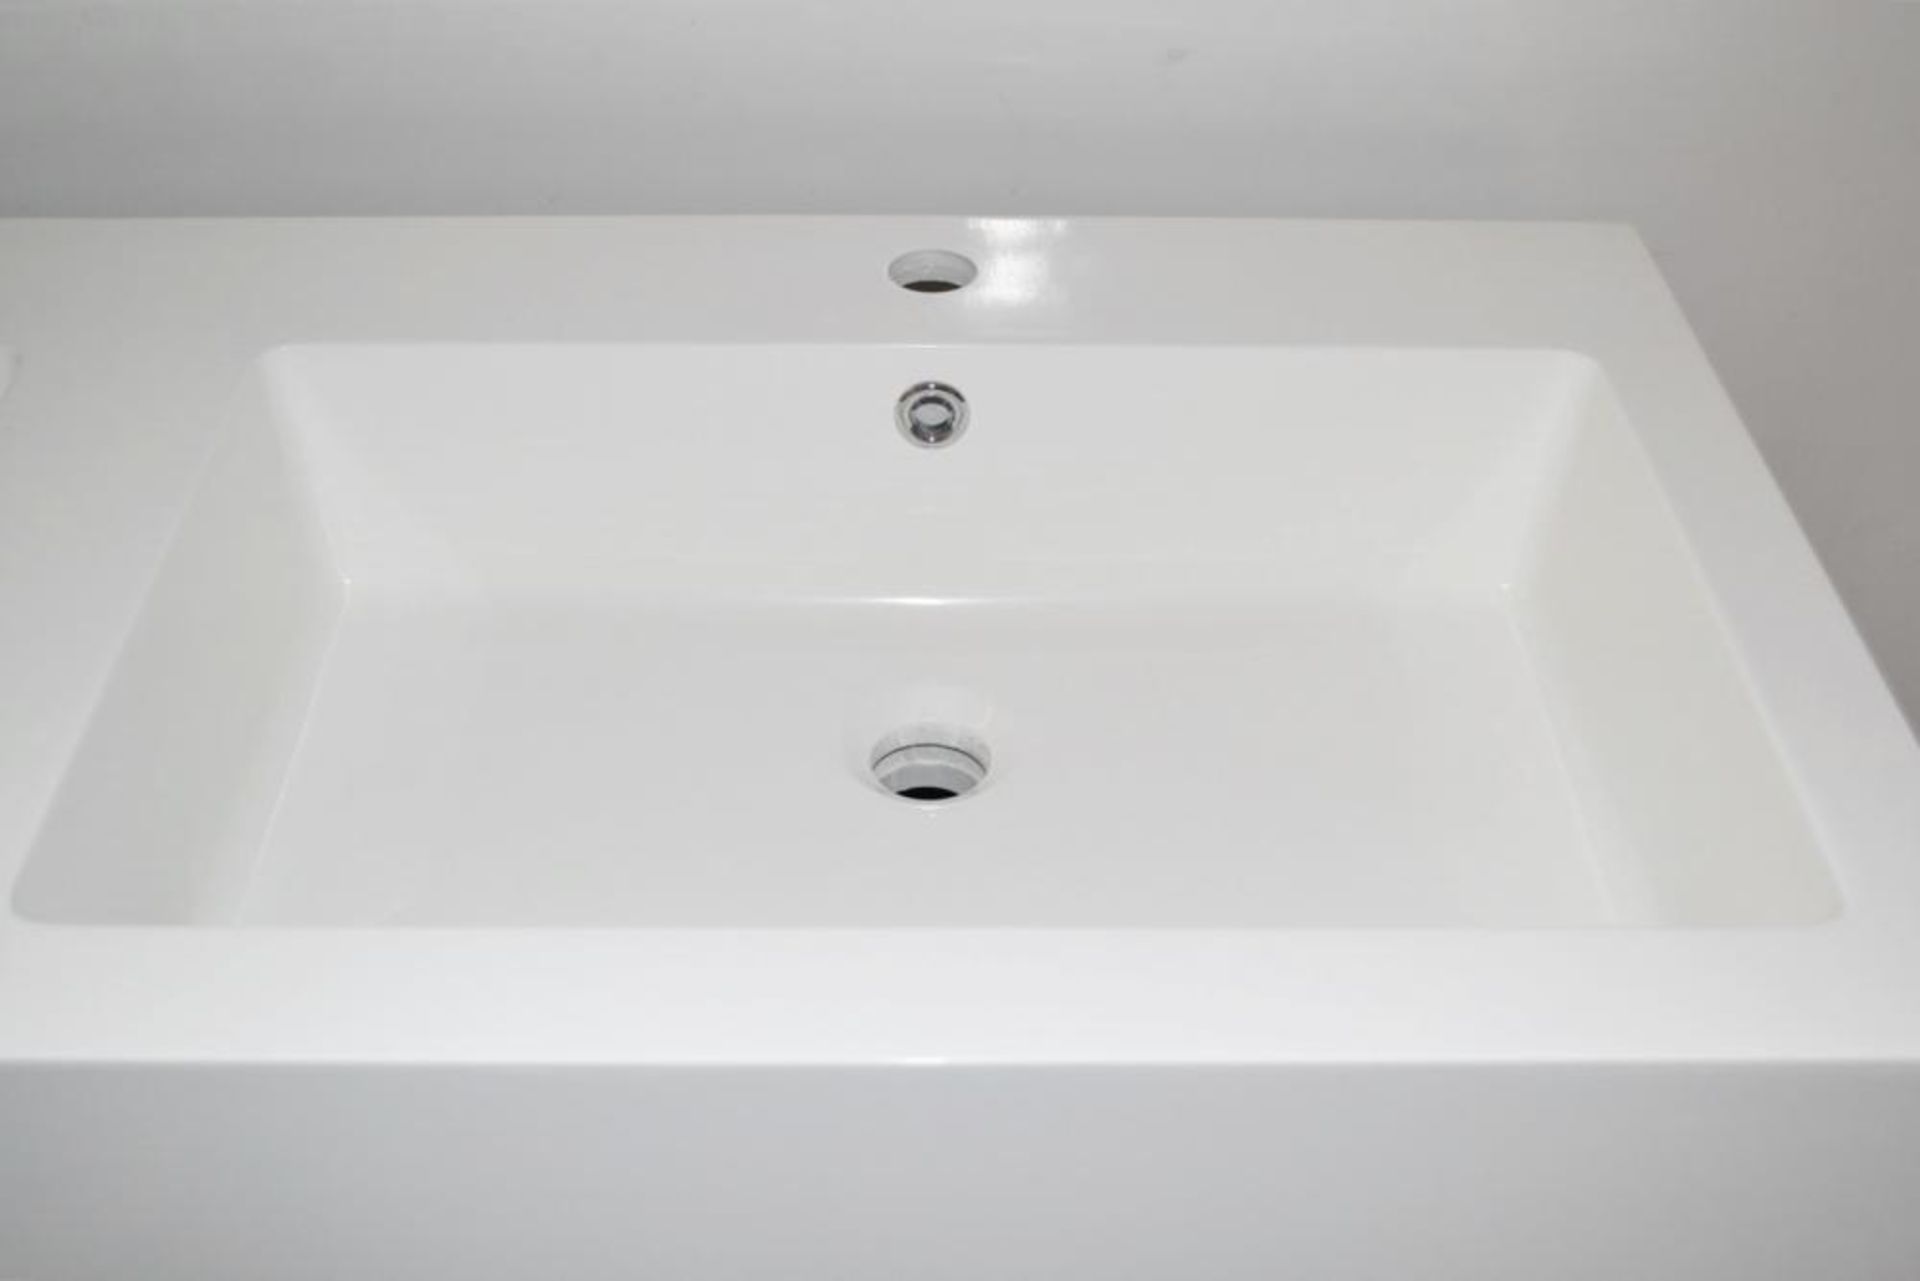 1 x Gloss White 1200mm 4-Door Double Basin Freestanding Bathroom Cabinet - New & Boxed Stock - CL307 - Image 2 of 8